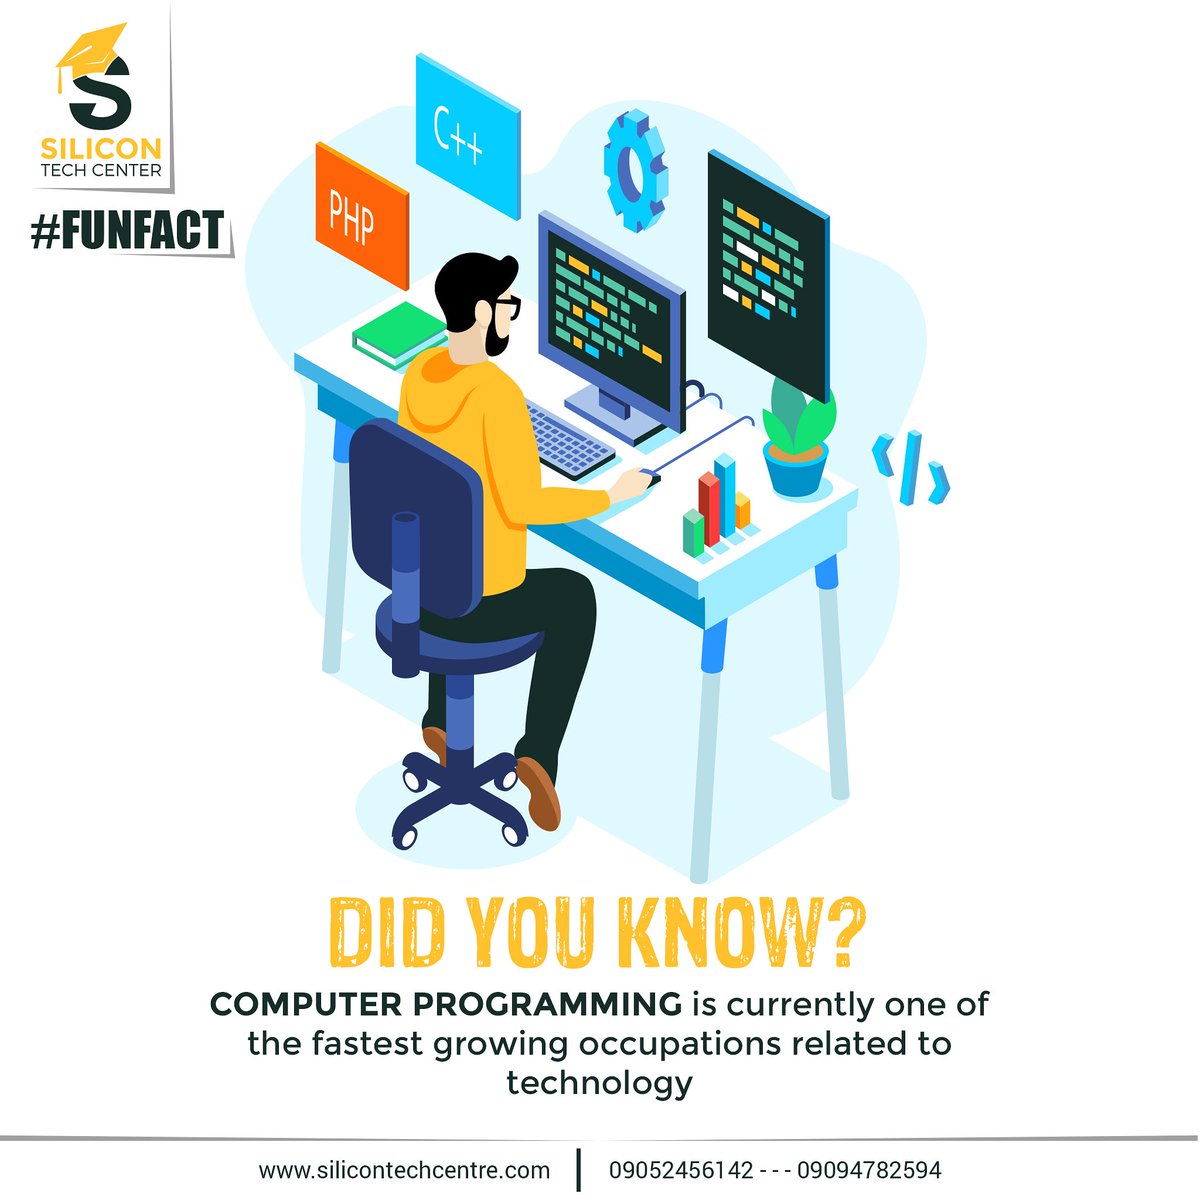 'Want to join one of the fastest growing occupations? join us at silicon tech center to get started.'

#TuesdayThoughts #TuesdayMotivation #RevolutionNow #silicontechnology #computerscience #nigeriatech #computerprogramming #computerprogrammer #techhub #technigeria #developer NTA